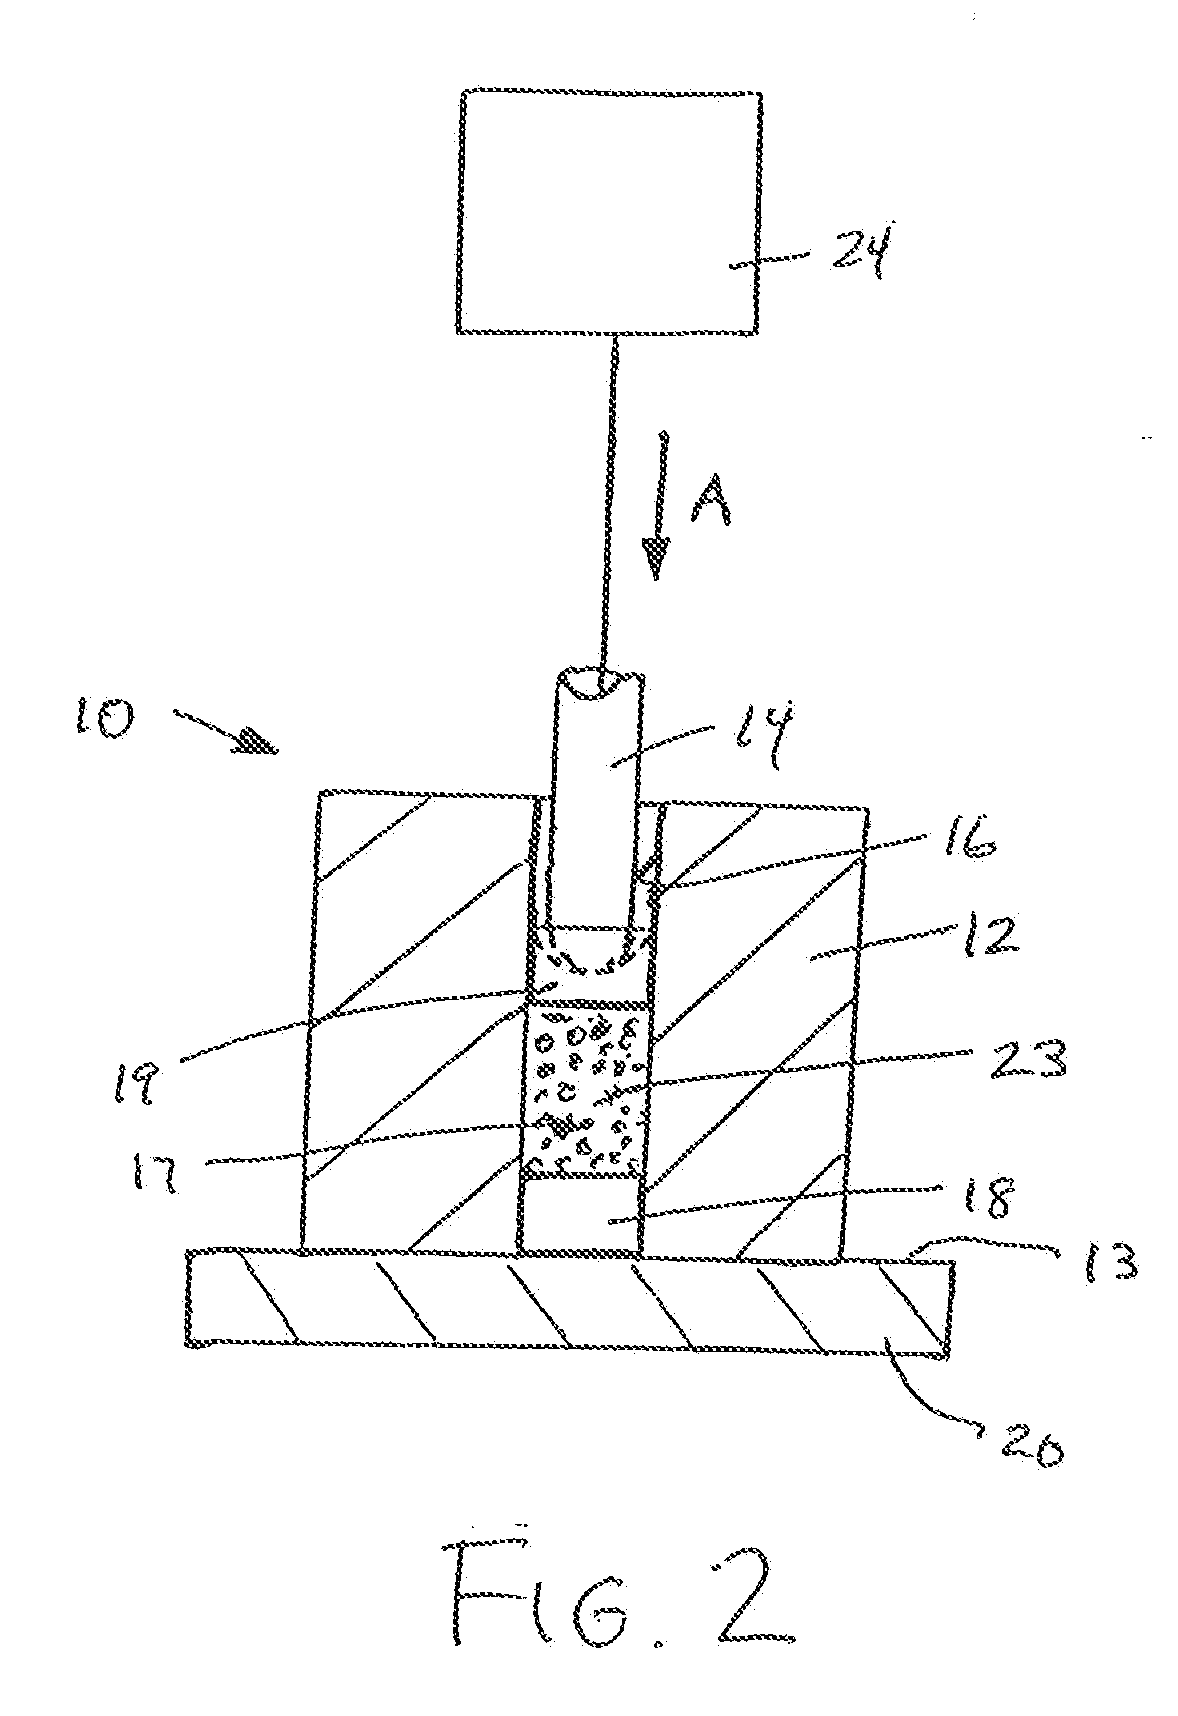 Protein matrix materials, devices and methods of making and using thereof